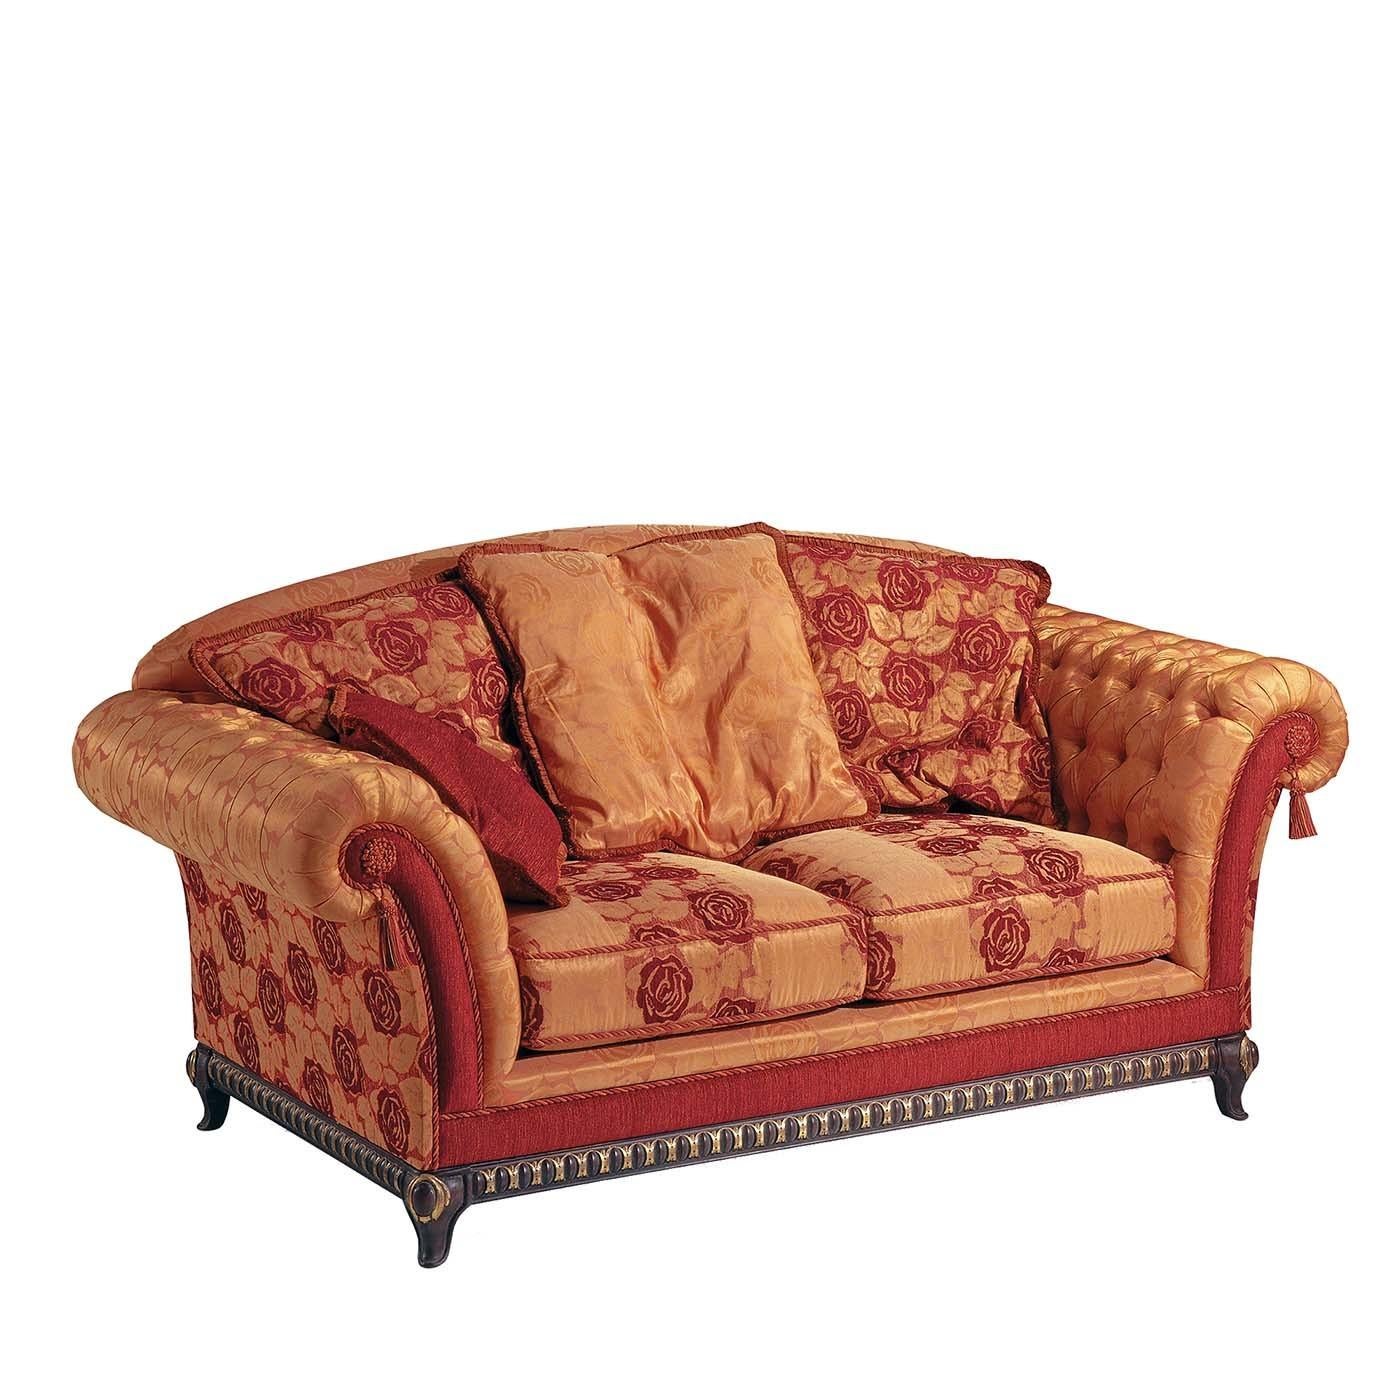 Fabric two-seat sofa with wooden base and Queen Anne style legs. Red floral pattern in contrast with the orange base emerge both on the seats and on the external sides. The CapitonnÃ¨-style padded inner part completes this elegant piece of furniture.